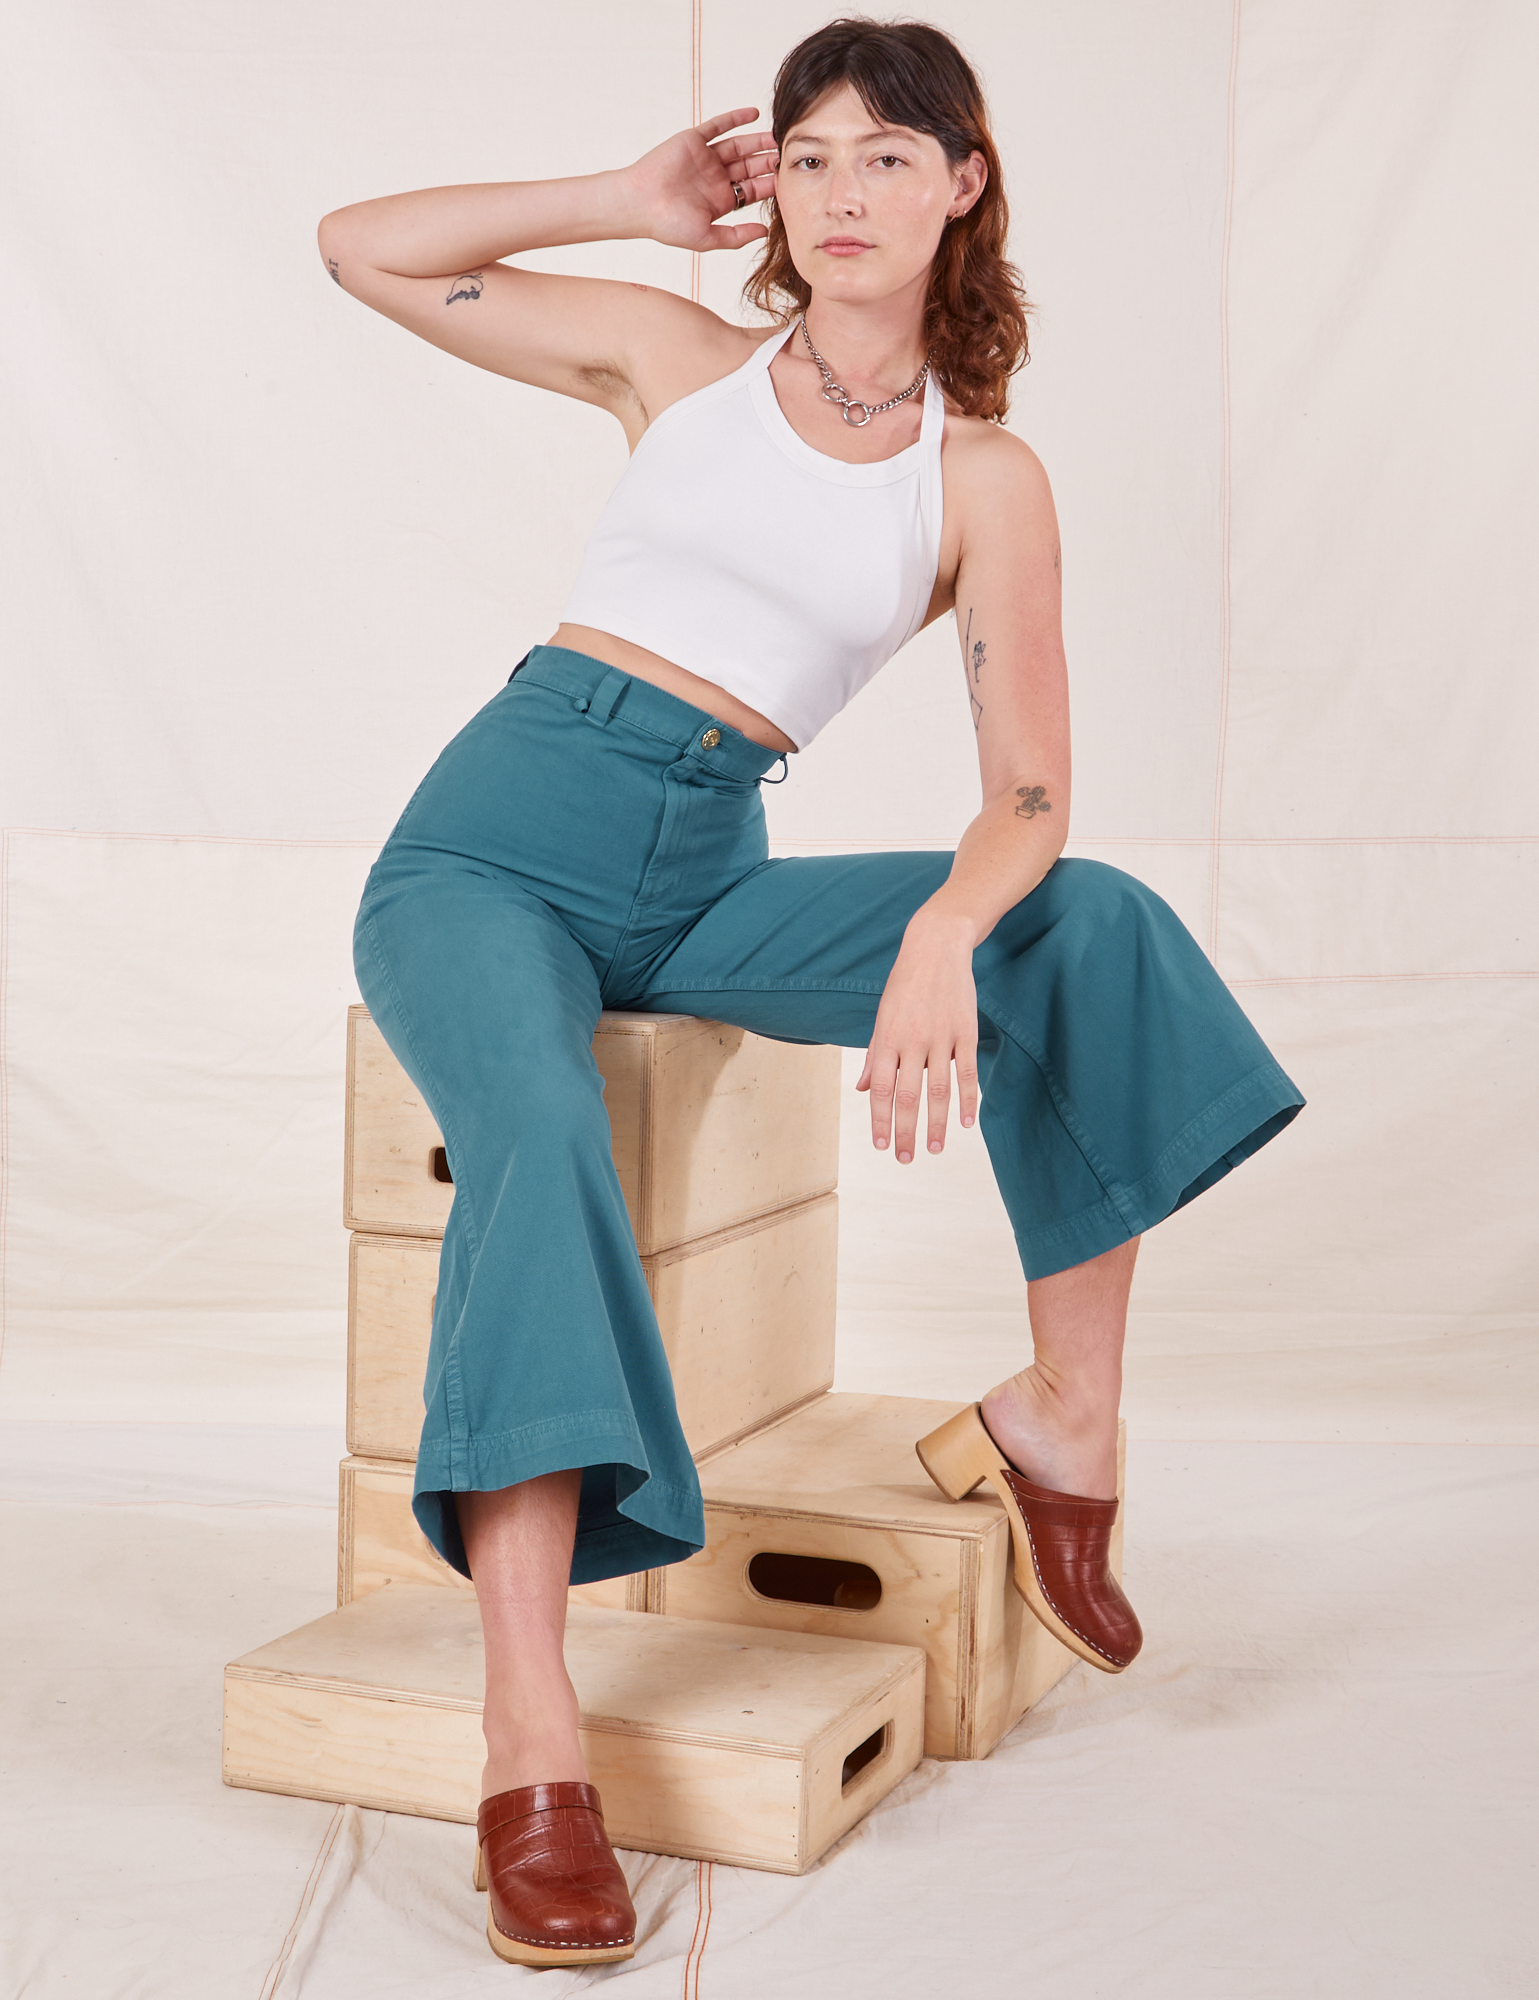 Alex is sitting on a stack of wooden crates. She is wearing Bell Bottoms in Marine Blue and Halter Top in vintage tee off-white